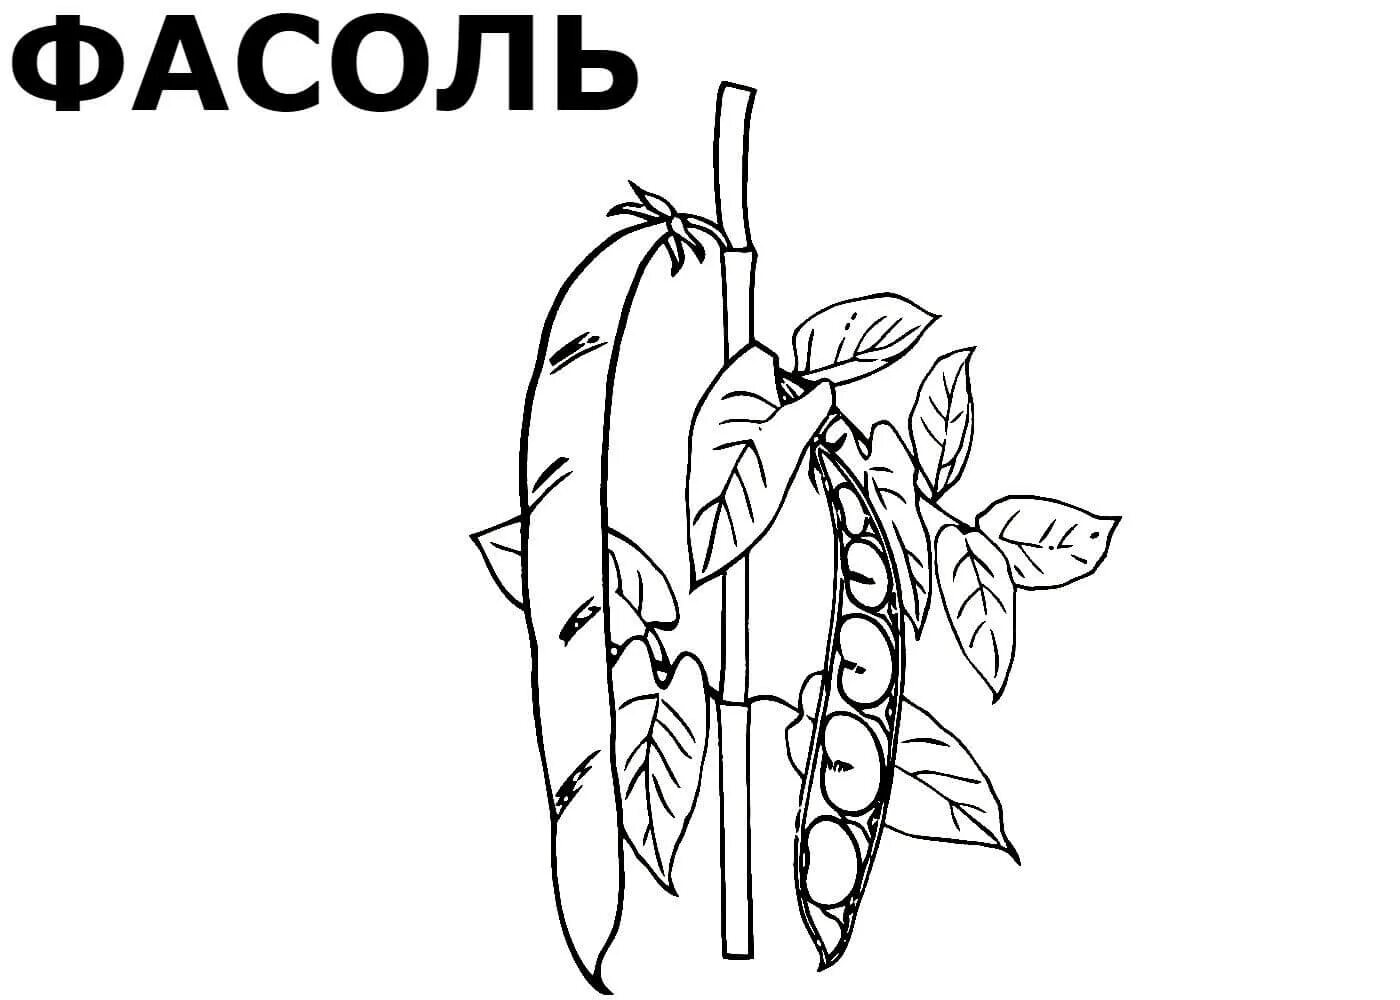 Adorable bean coloring page for students